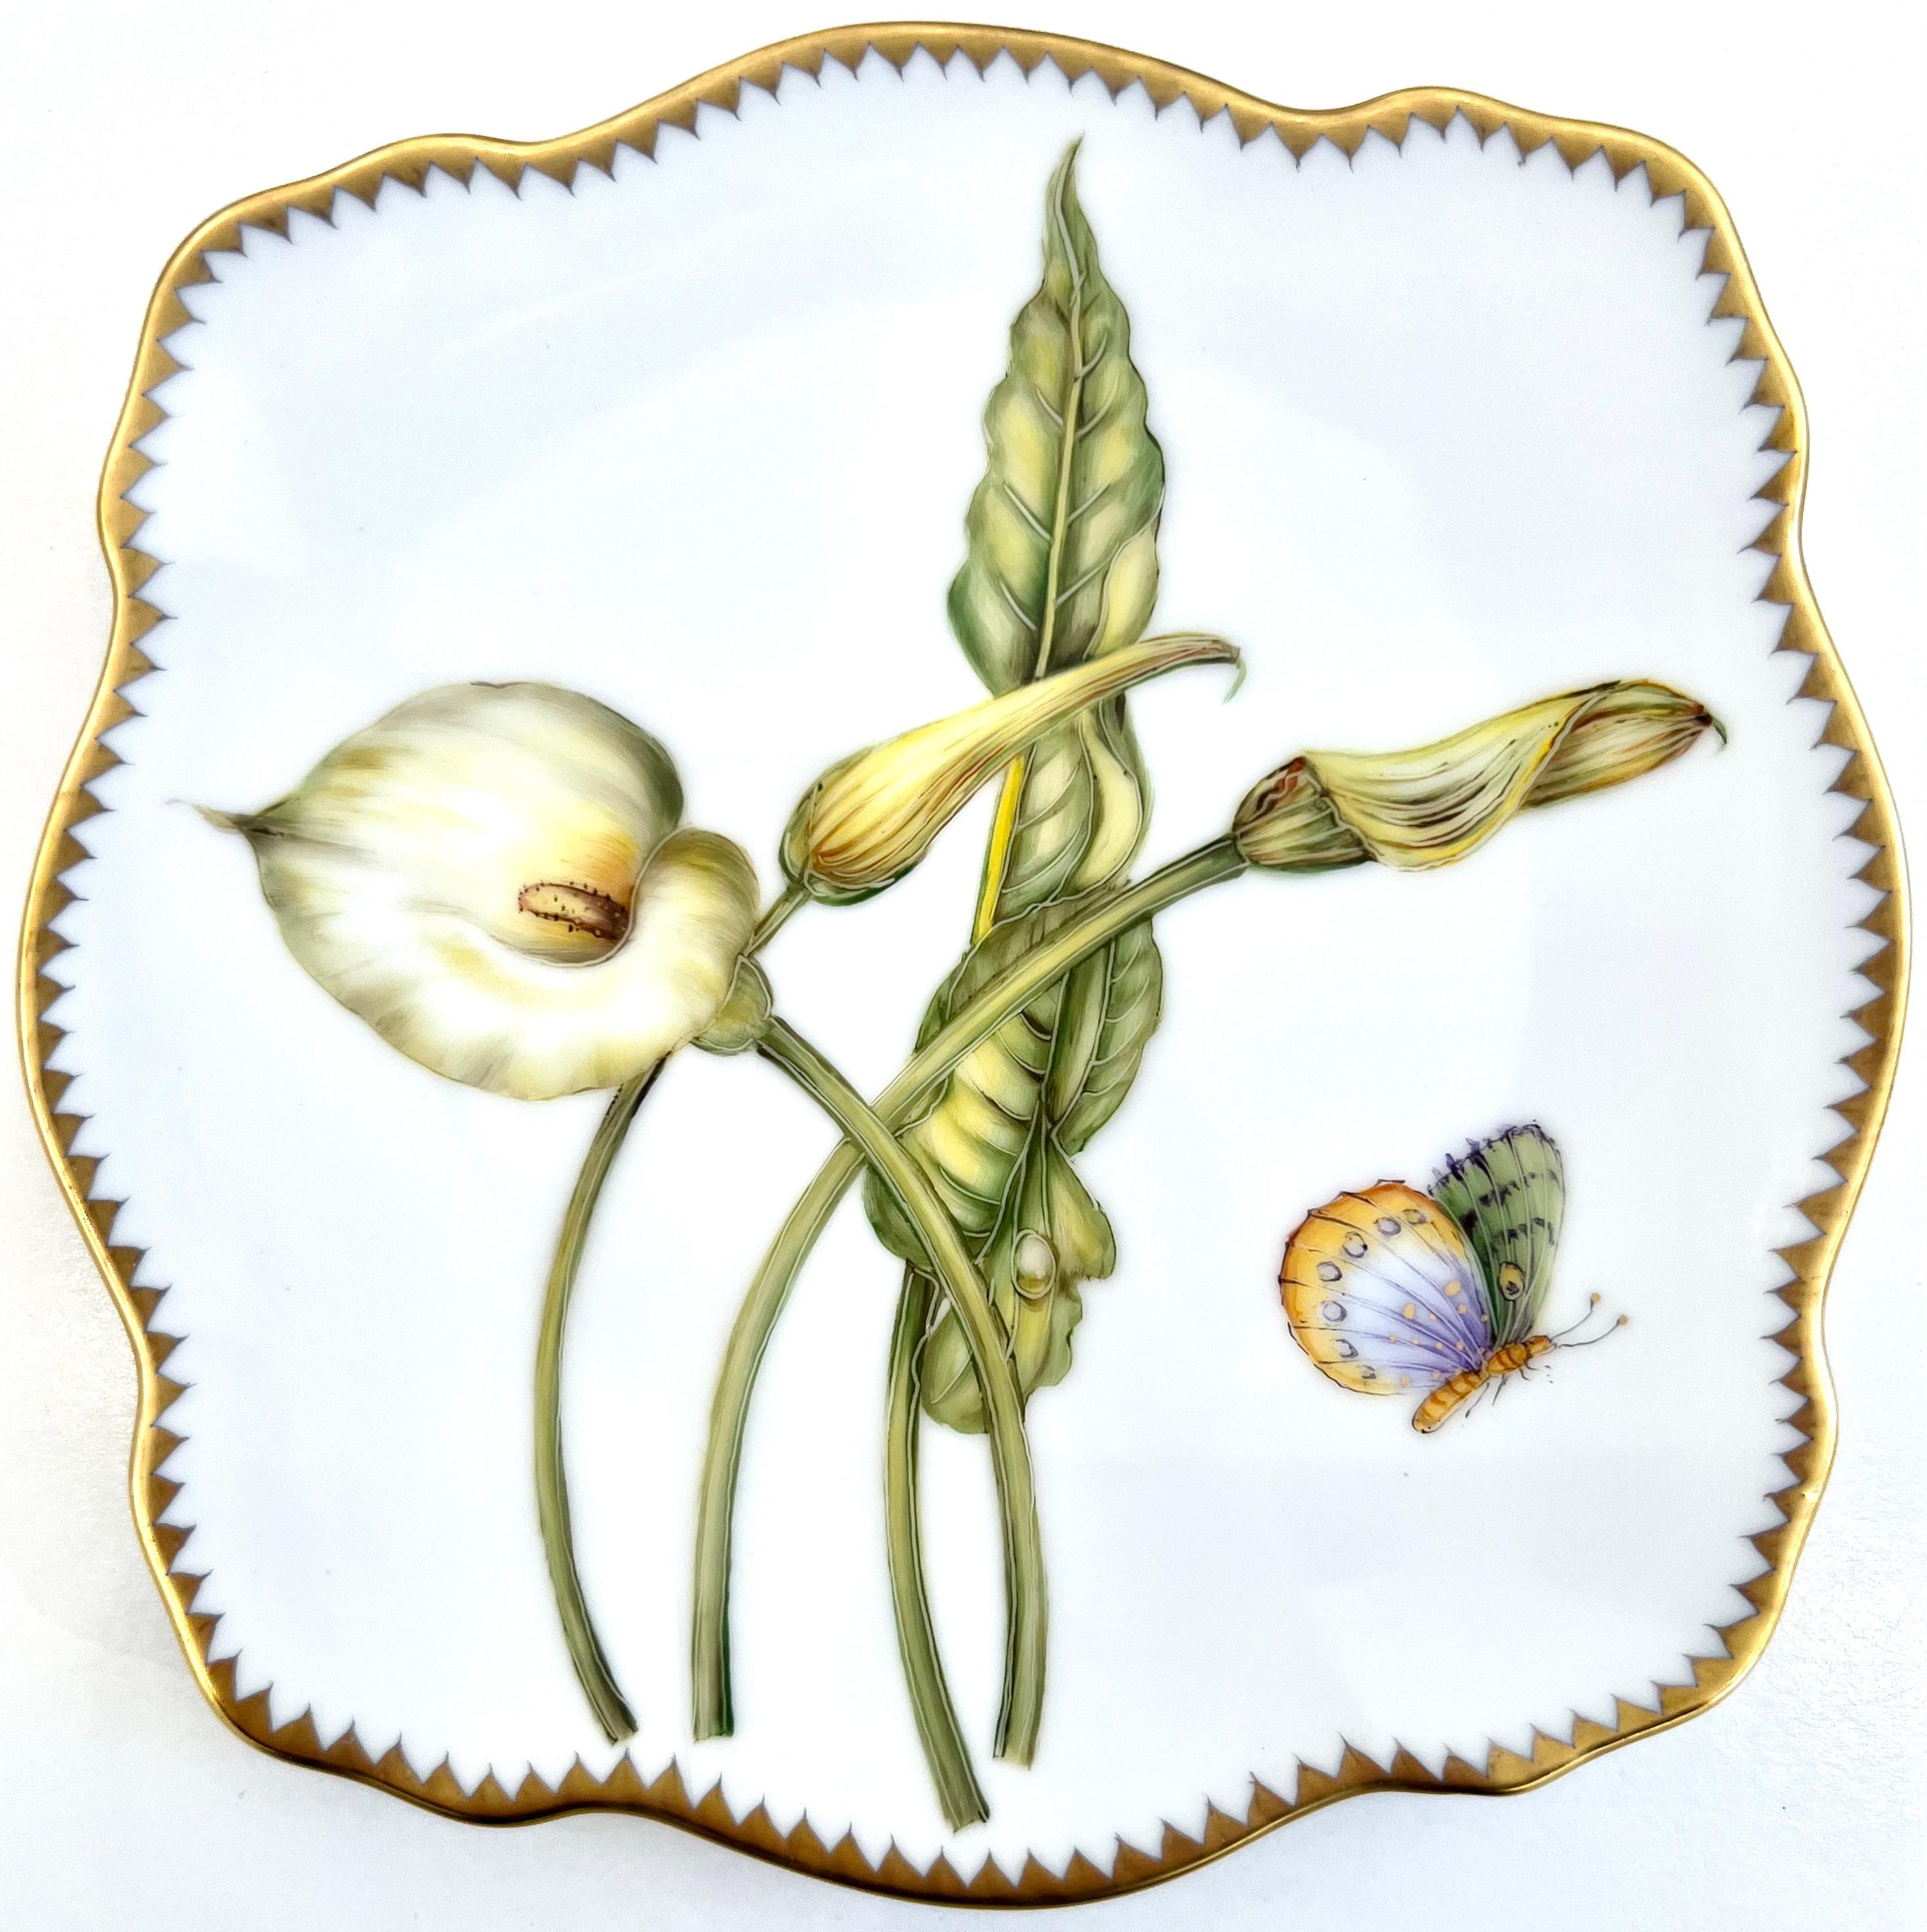 Hungarian Anna Weatherley - Hand Painted Porcelain Plates